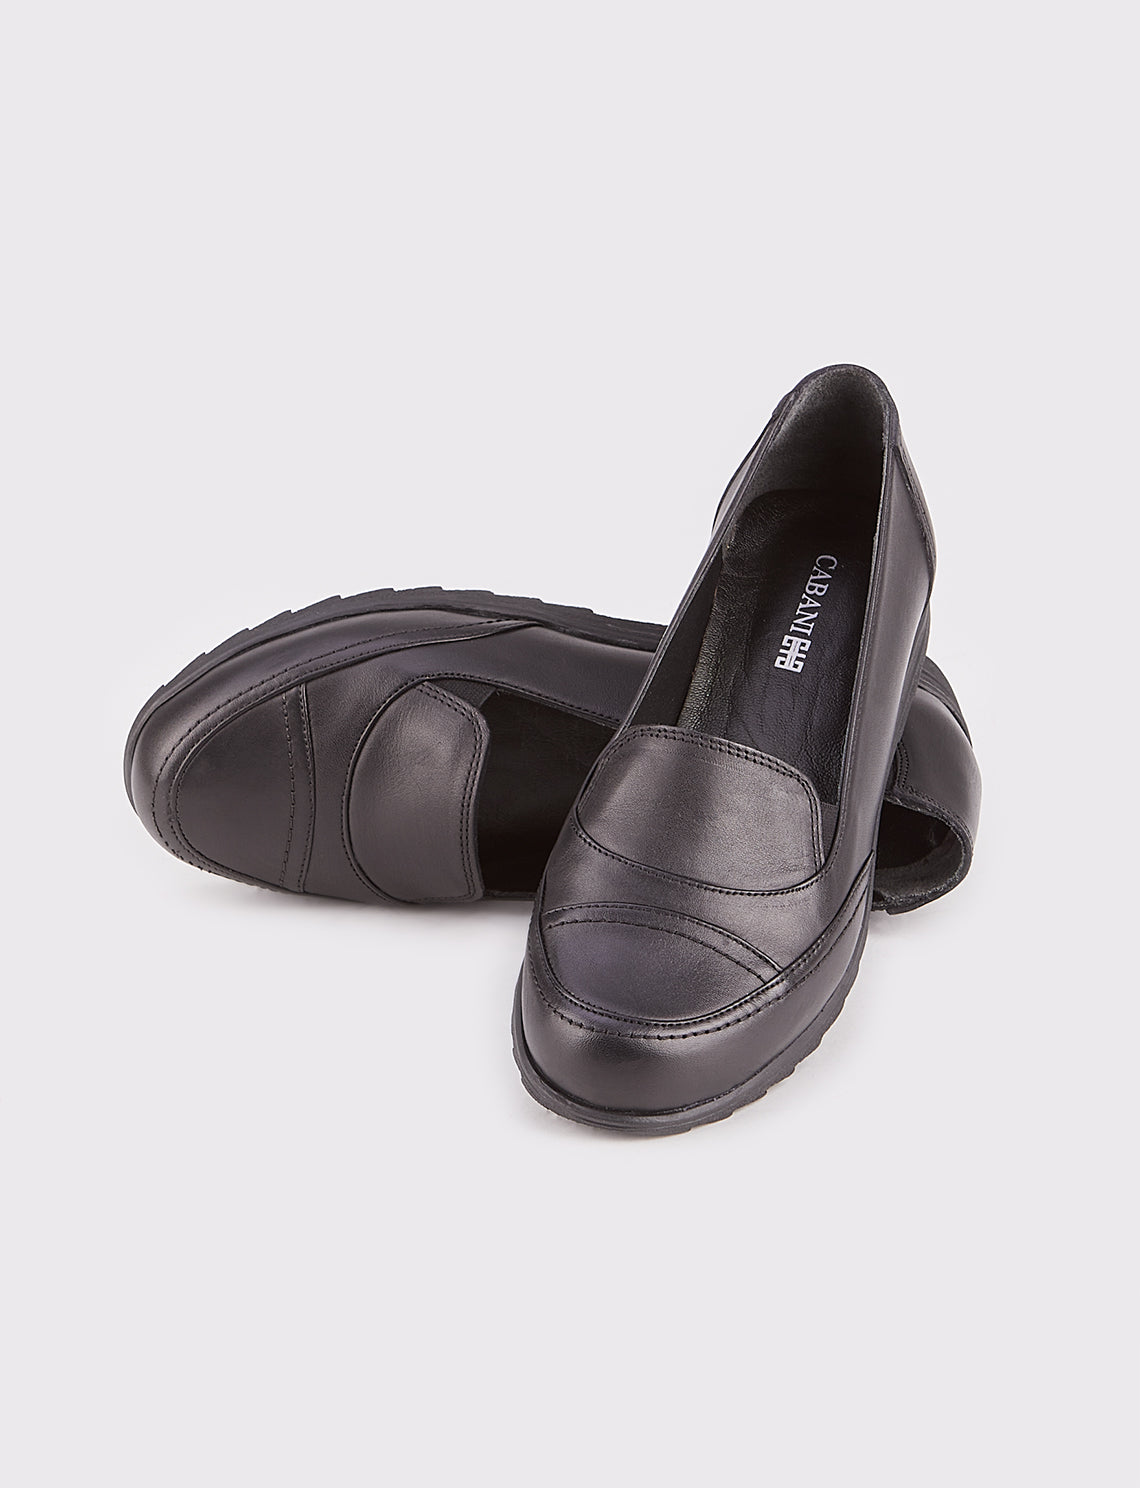 Women Black Genuine Leather Casual Flat Shoes